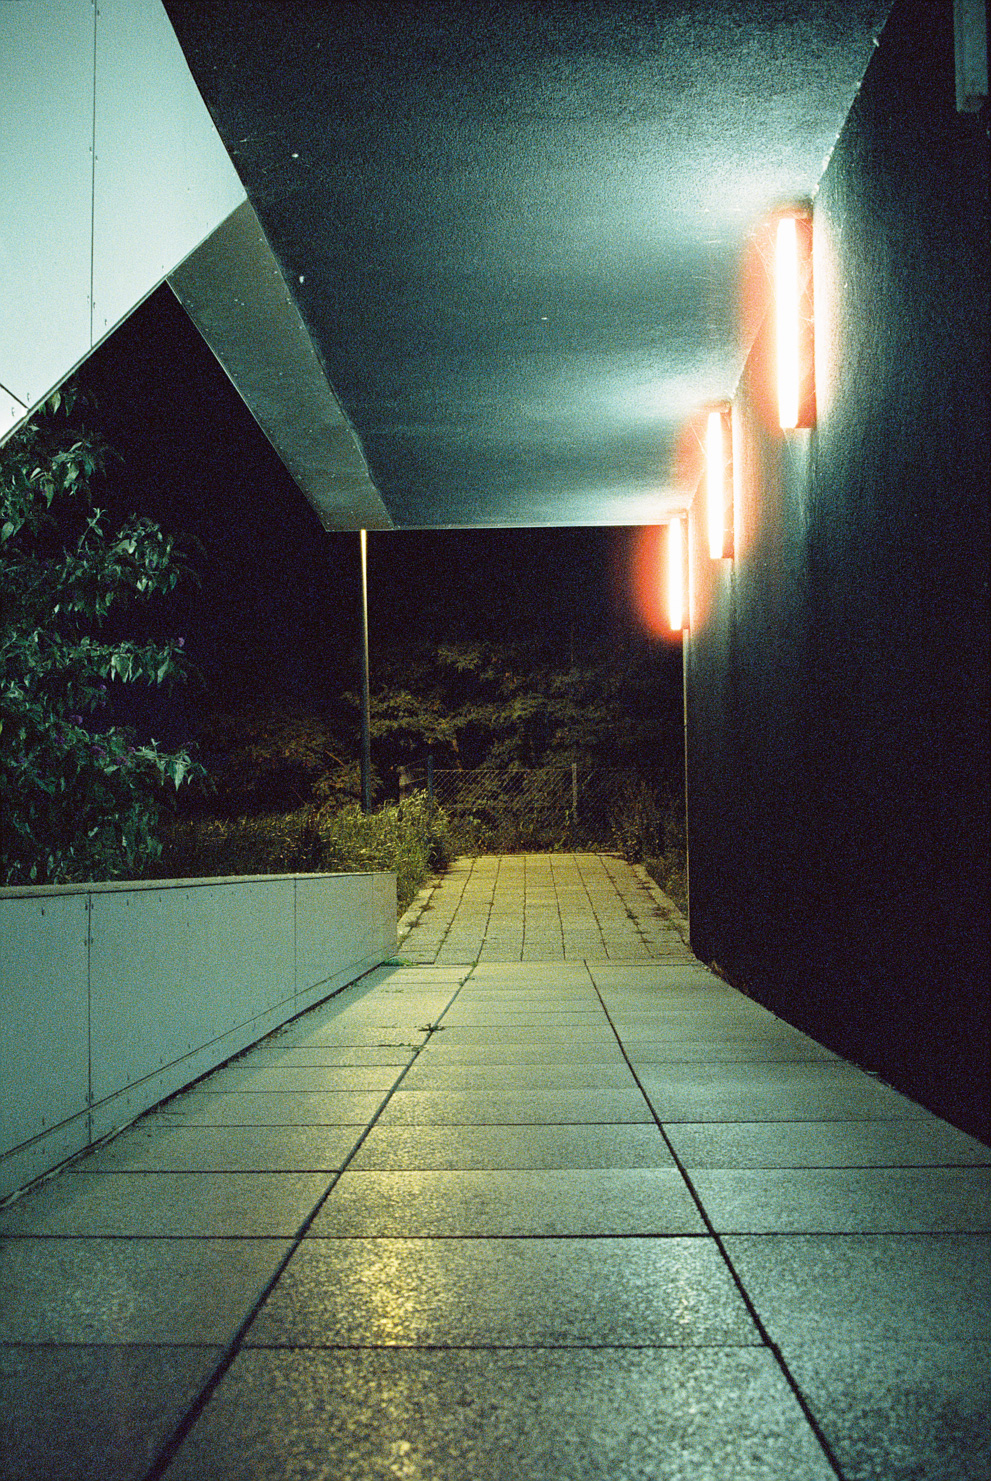 A stone corridor with mixed lighting during night. Shot on Cinestille 800T.